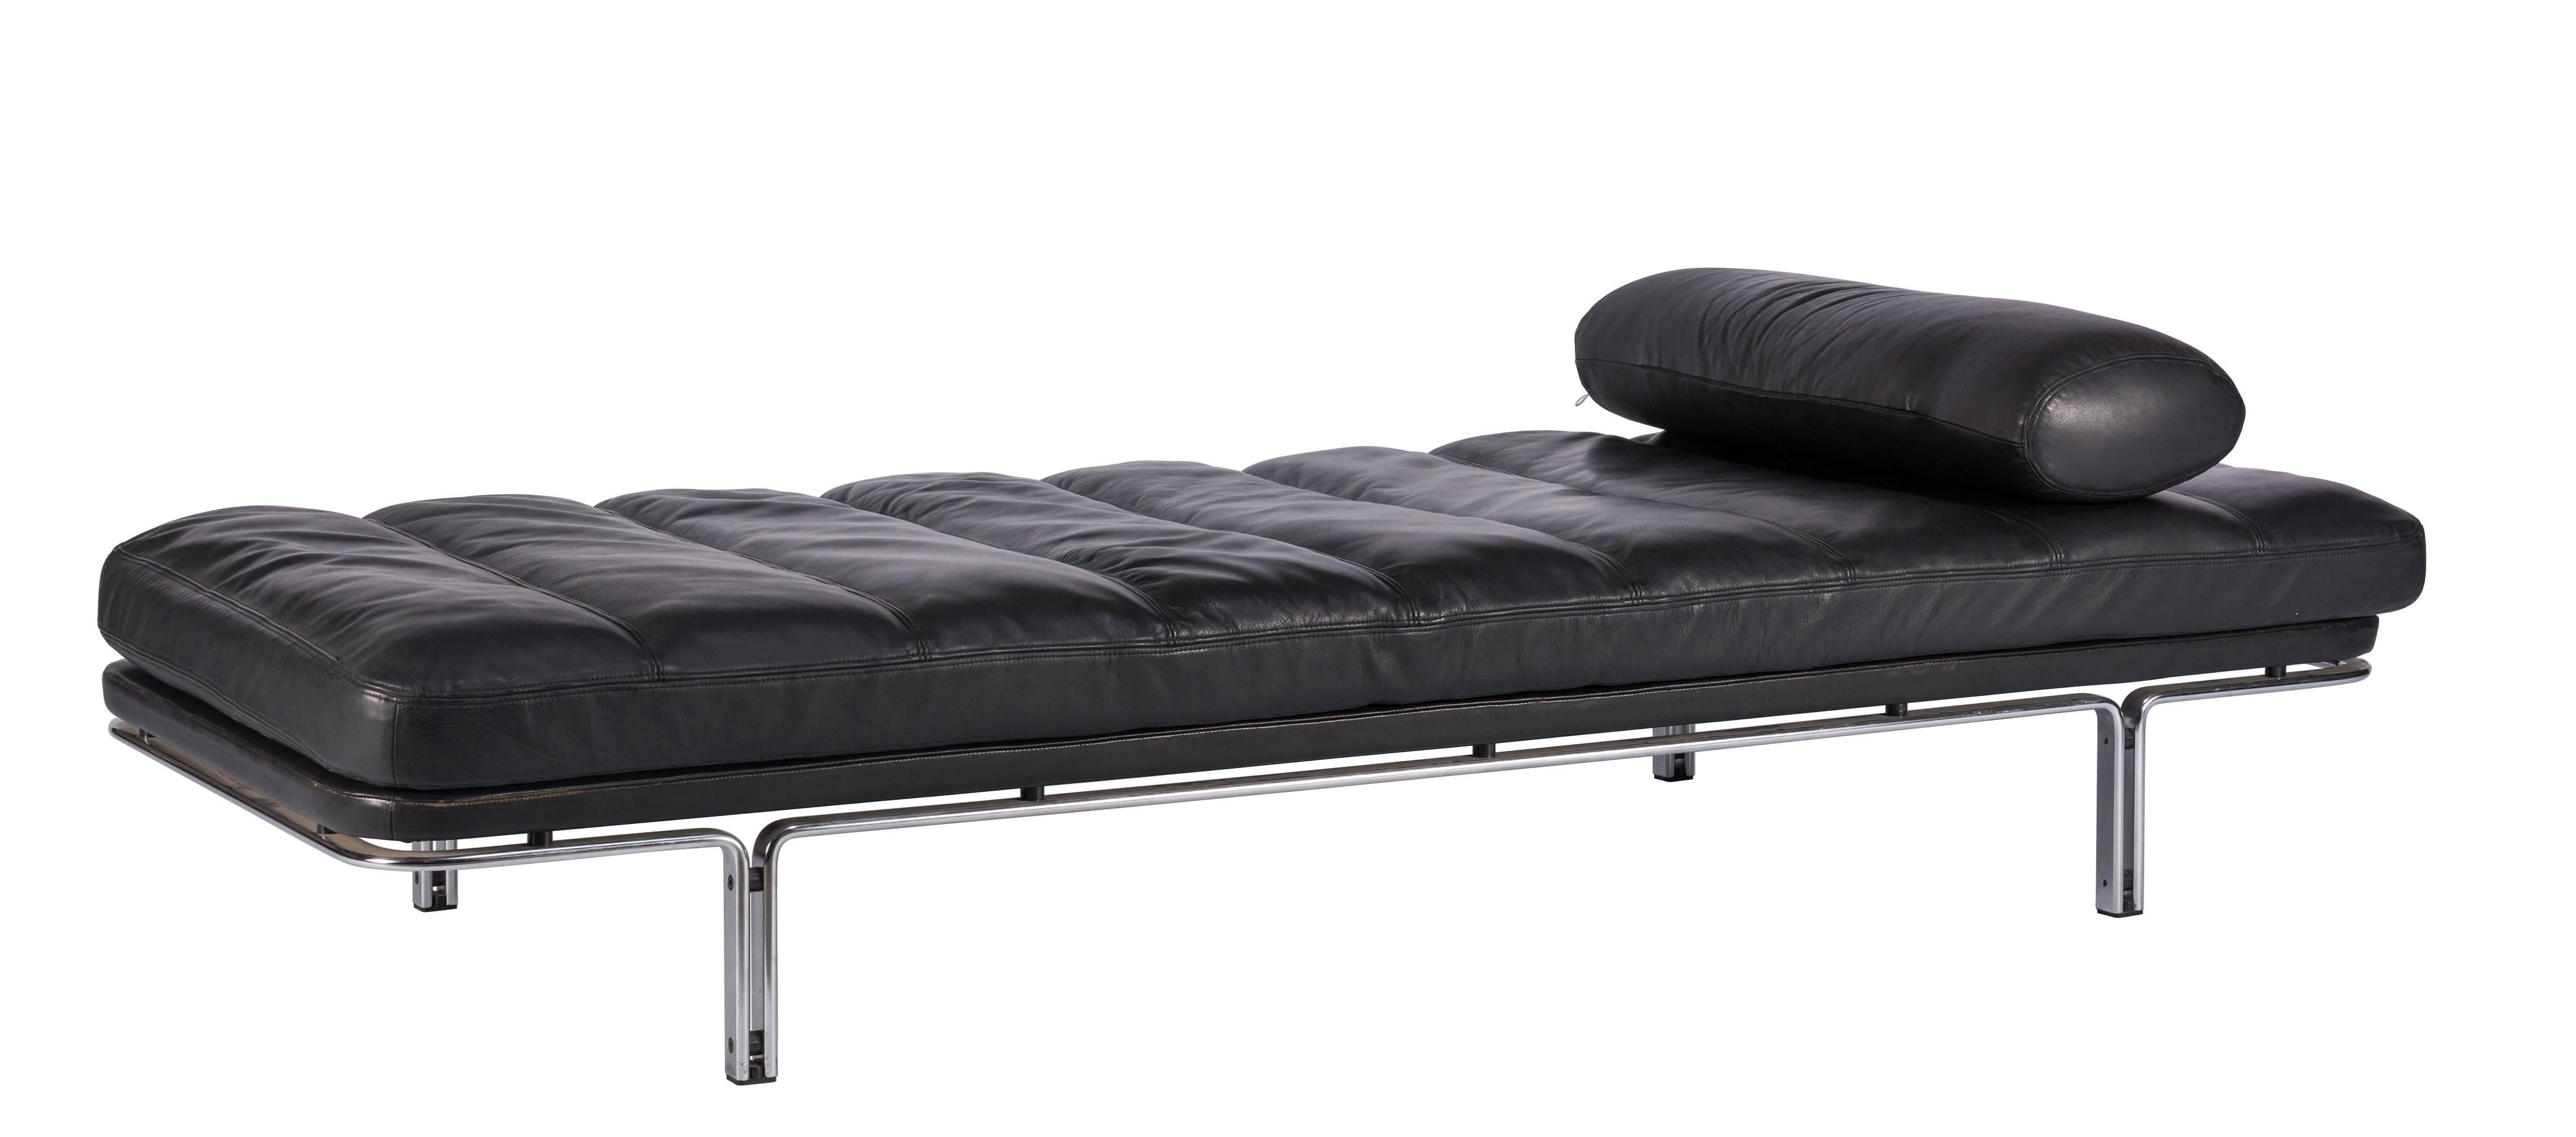 Functional daybed designed by Horst Bruning for Kill International, circa 1968.
Superior construction with original leather cushion and headrest in excellent original condition.